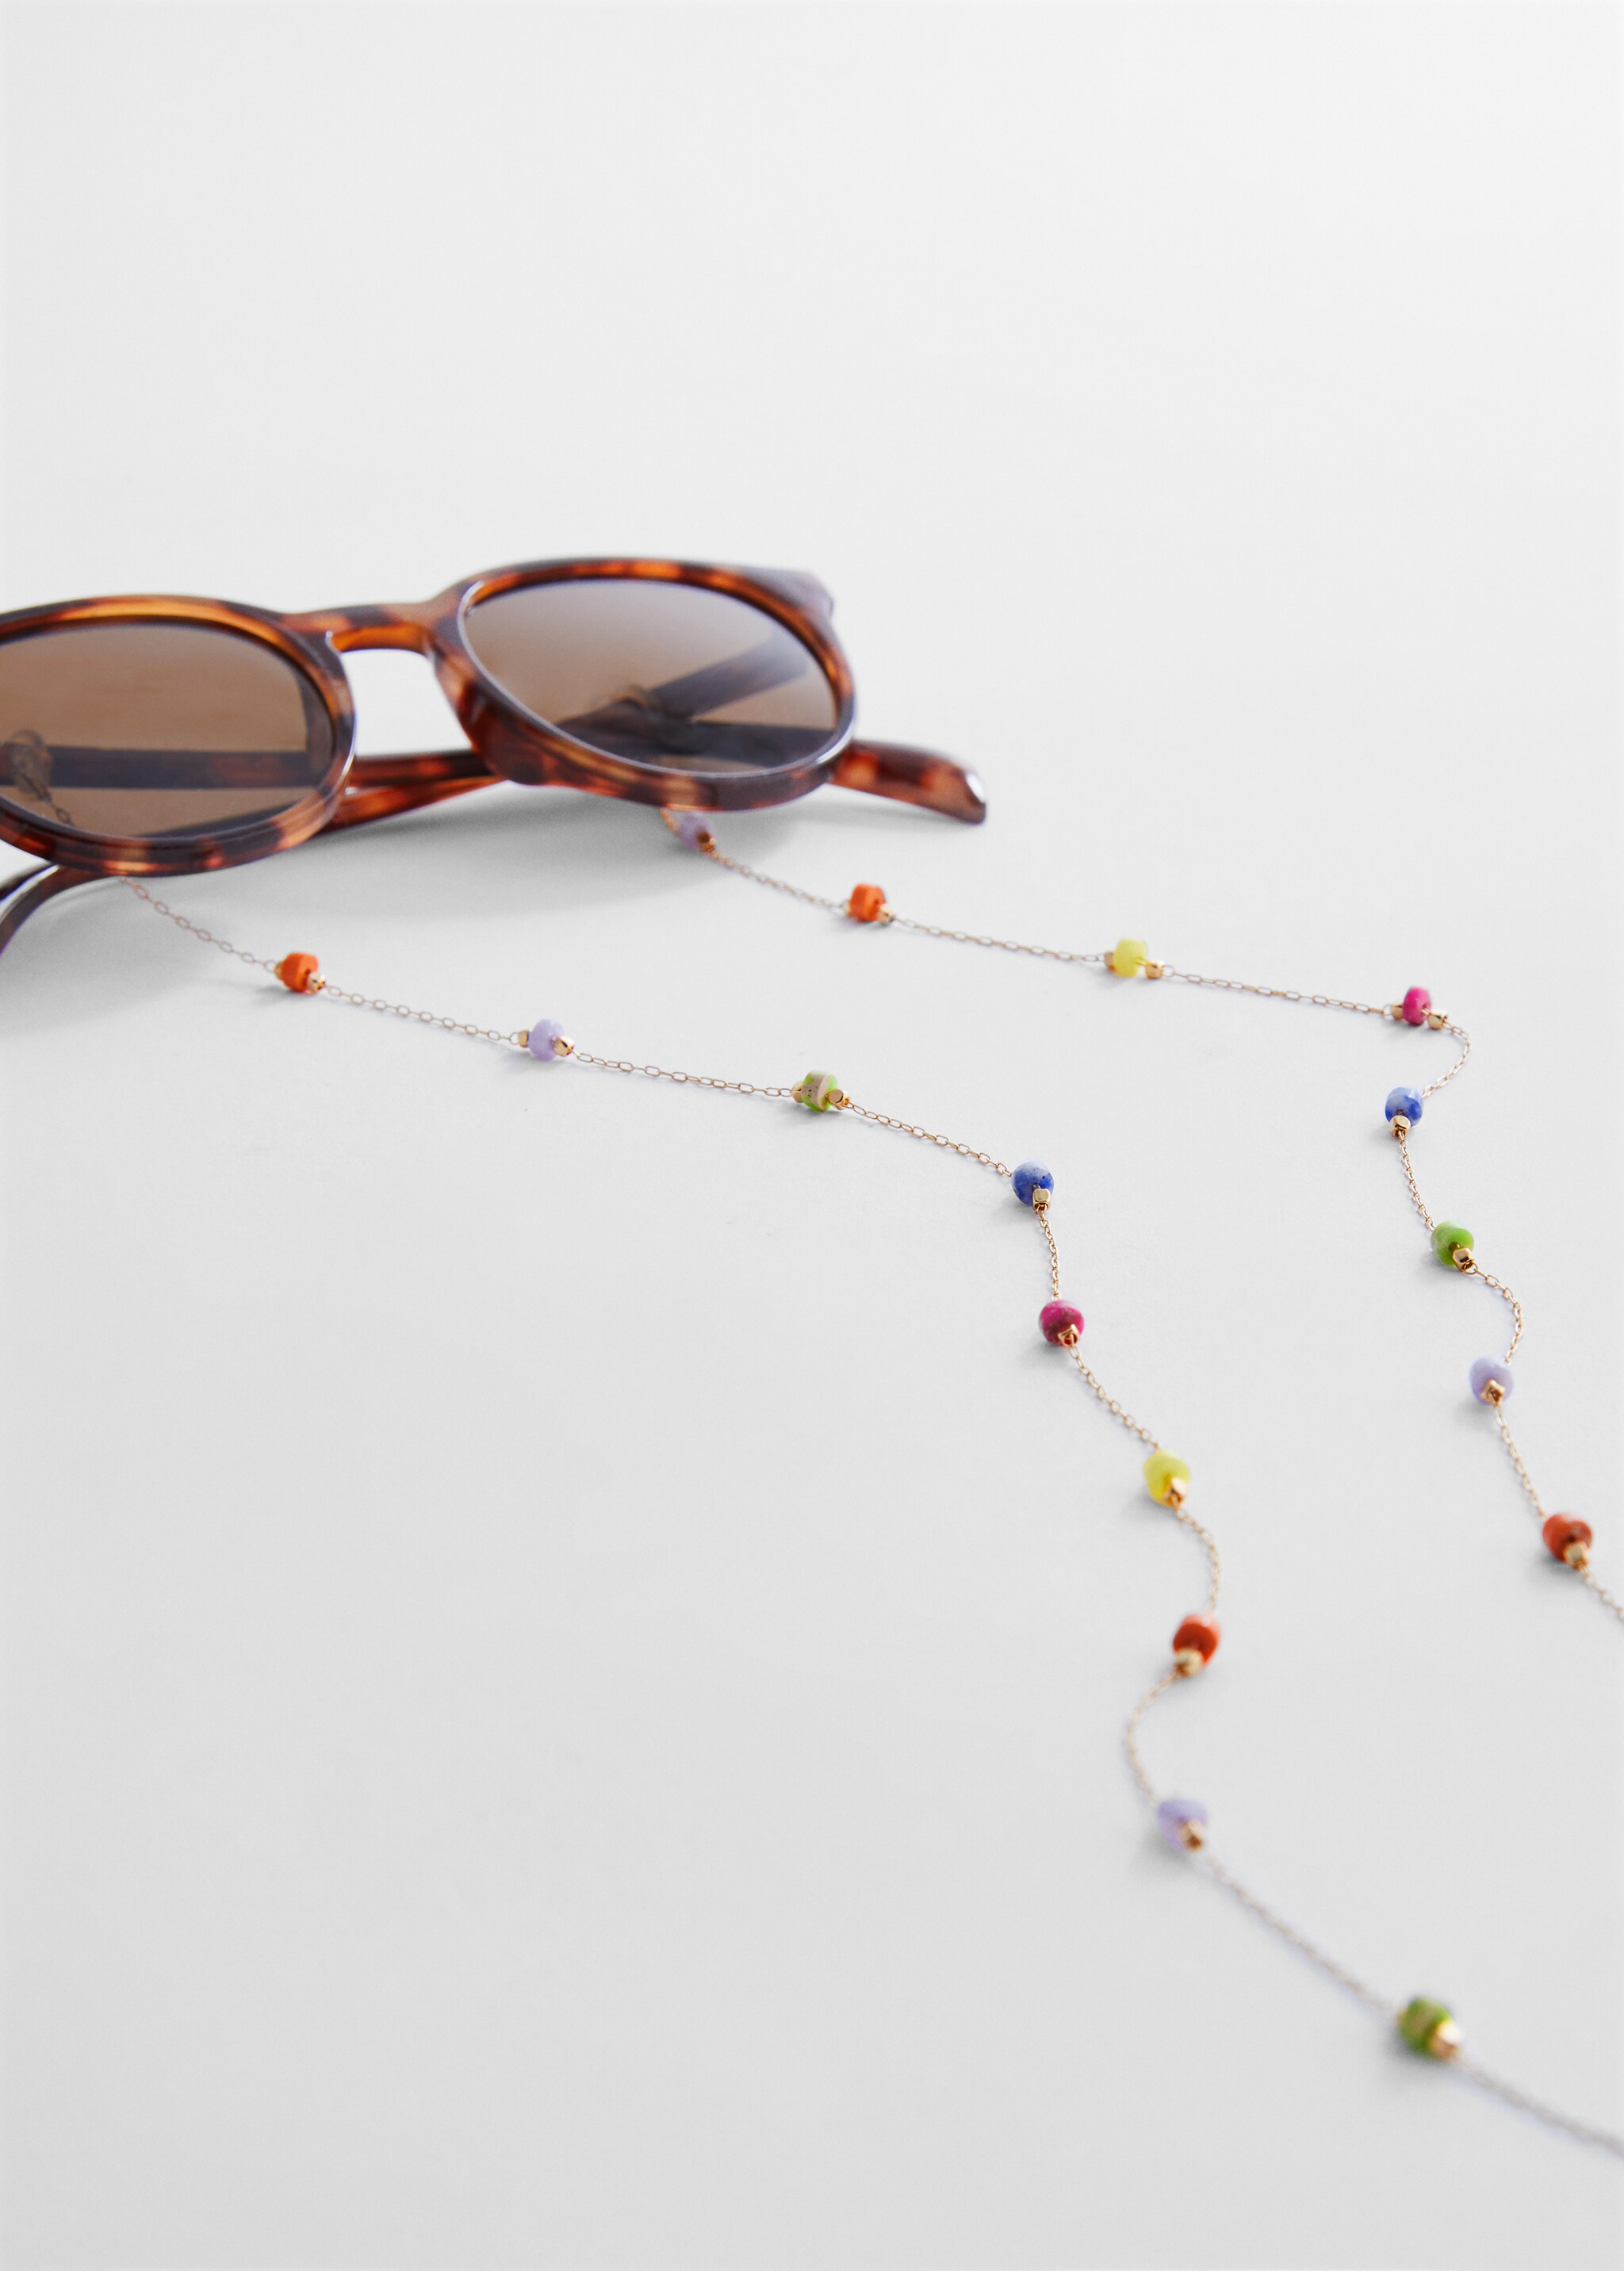 Sunglasses beads chain - Details of the article 1